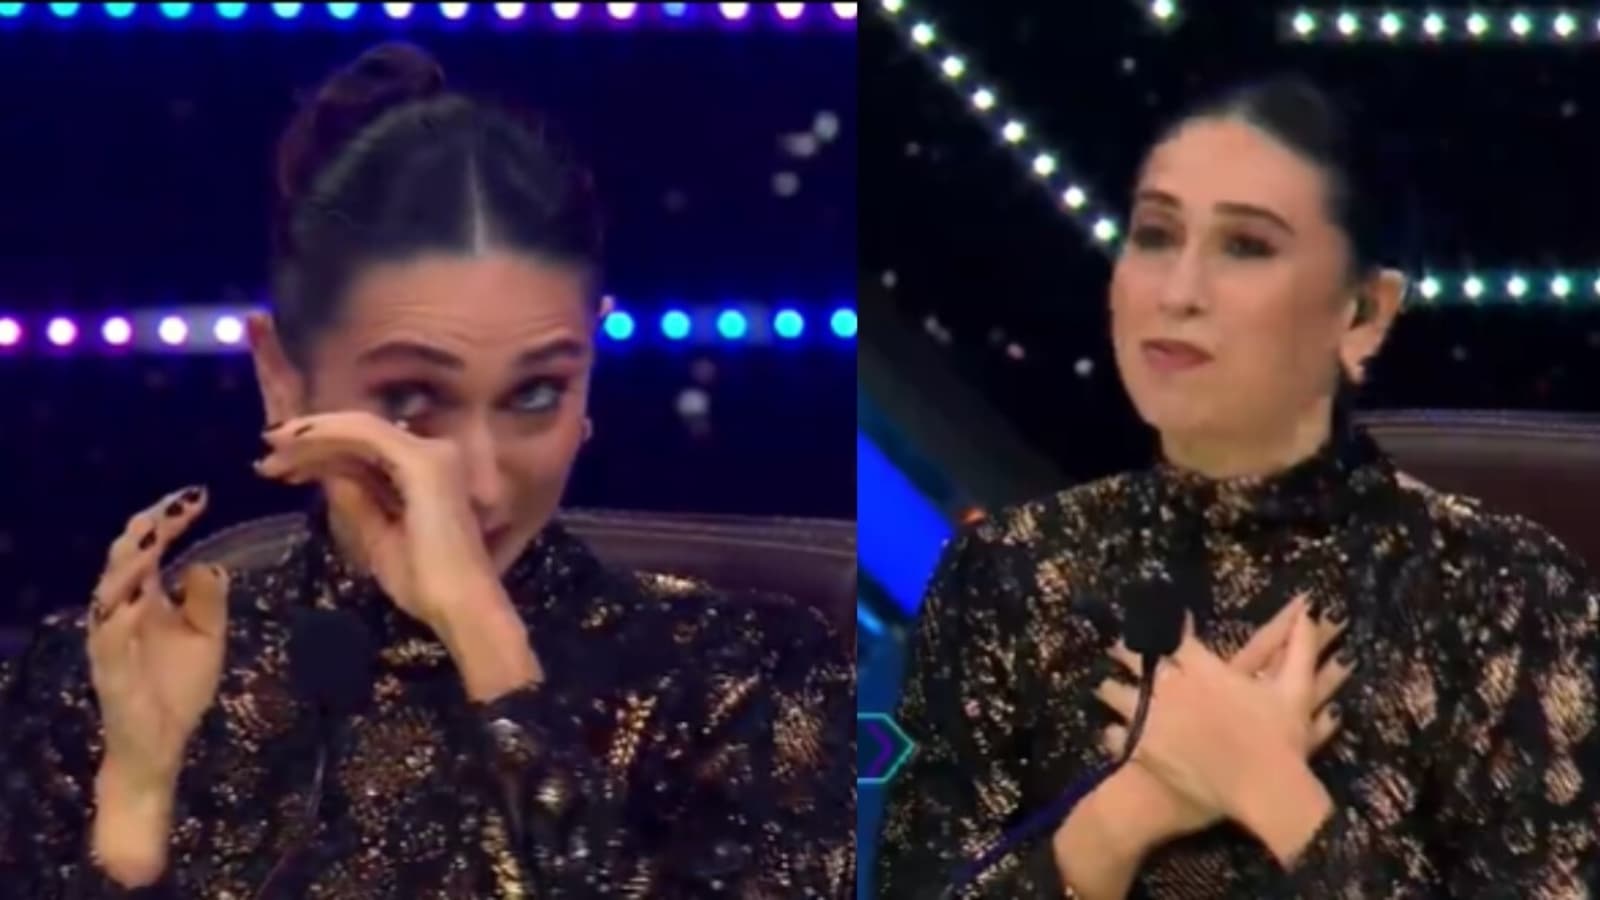 Xxx Hd Karisma Kapoor - Karisma Kapoor, filling in for Shilpa Shetty, cries on Super Dancer 4 sets.  Here's why - Hindustan Times